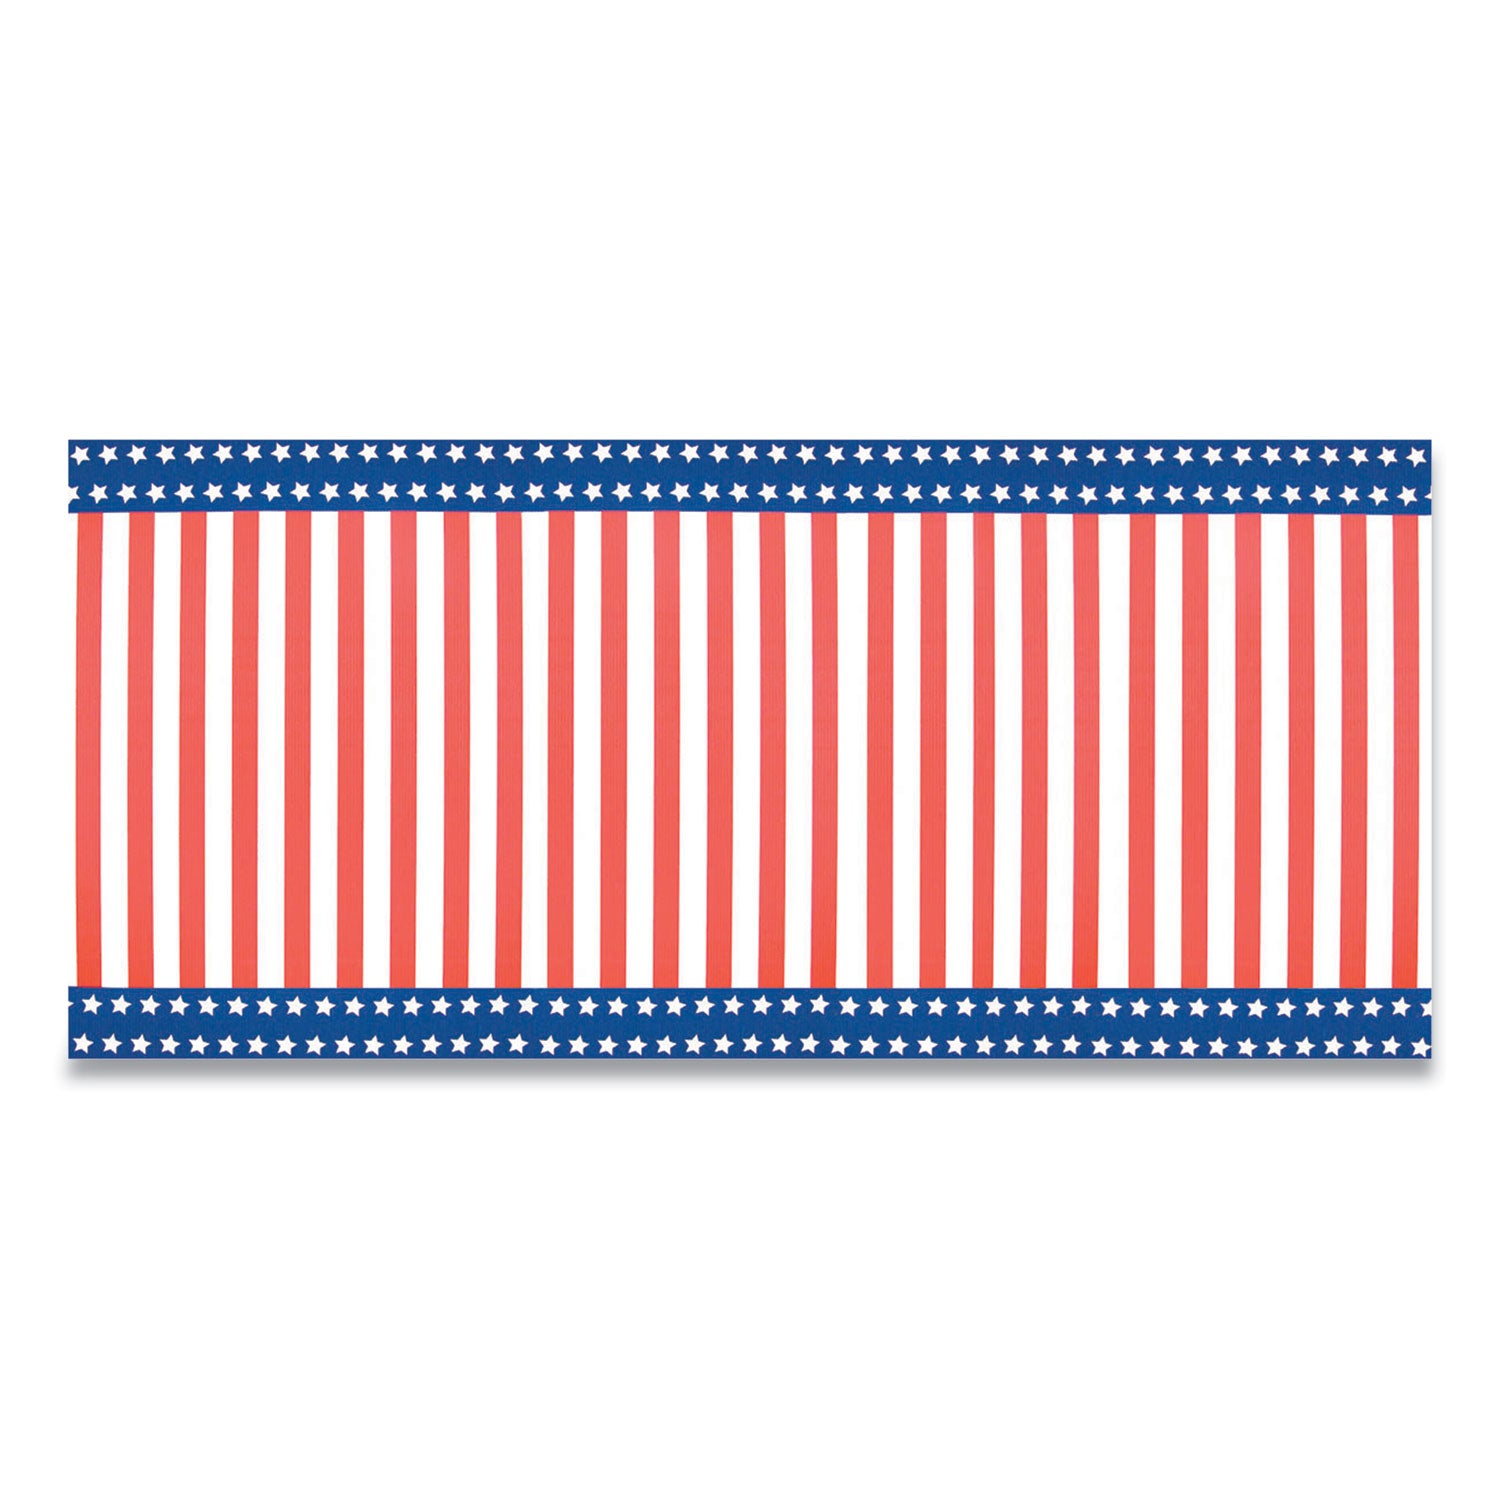 corobuff-corrugated-paper-roll-48-x-25-ft-stars-and-stripes_pac0019841 - 1